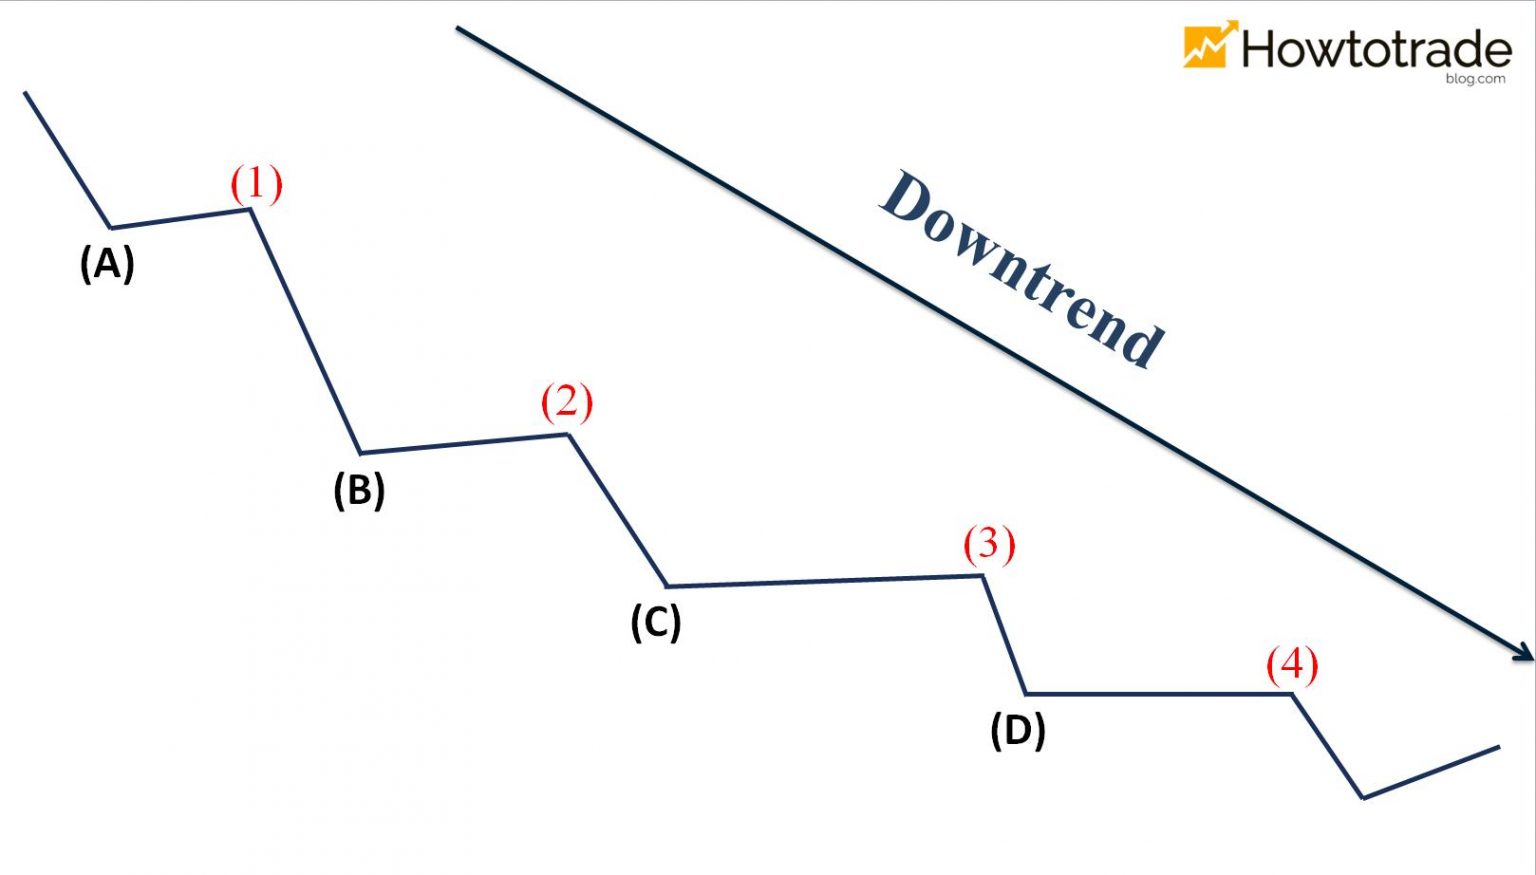 The ladder downtrend pattern